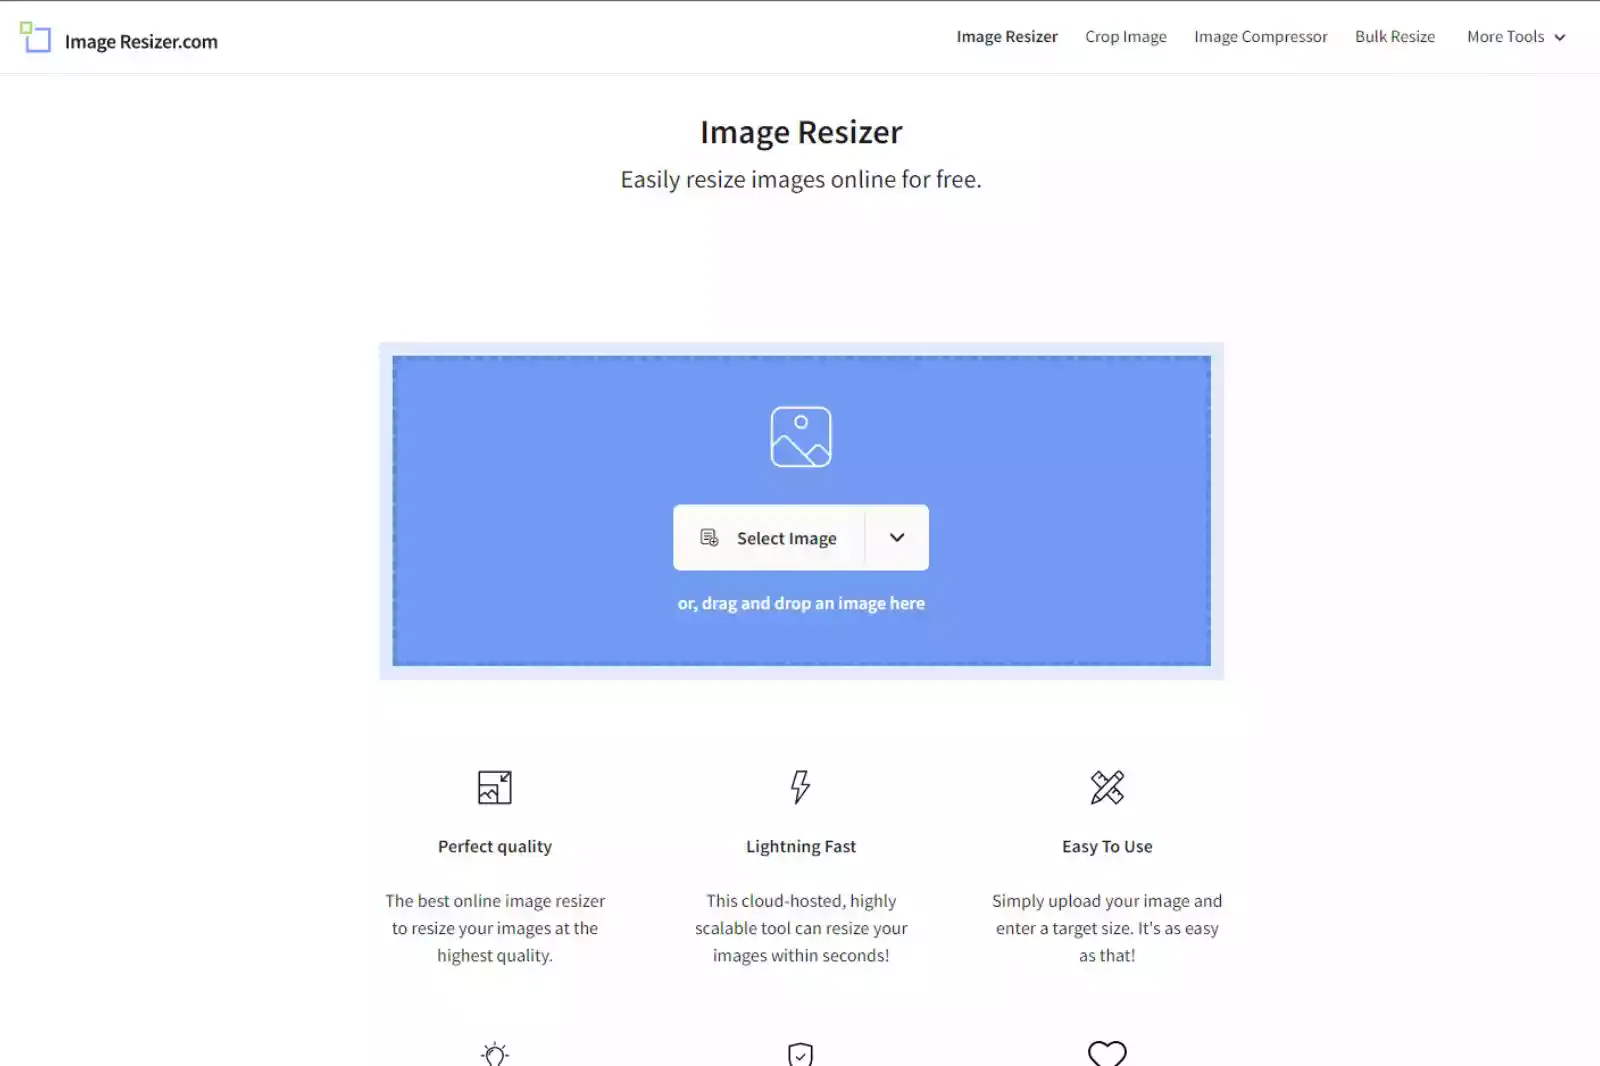 Home Page of Image Resizer